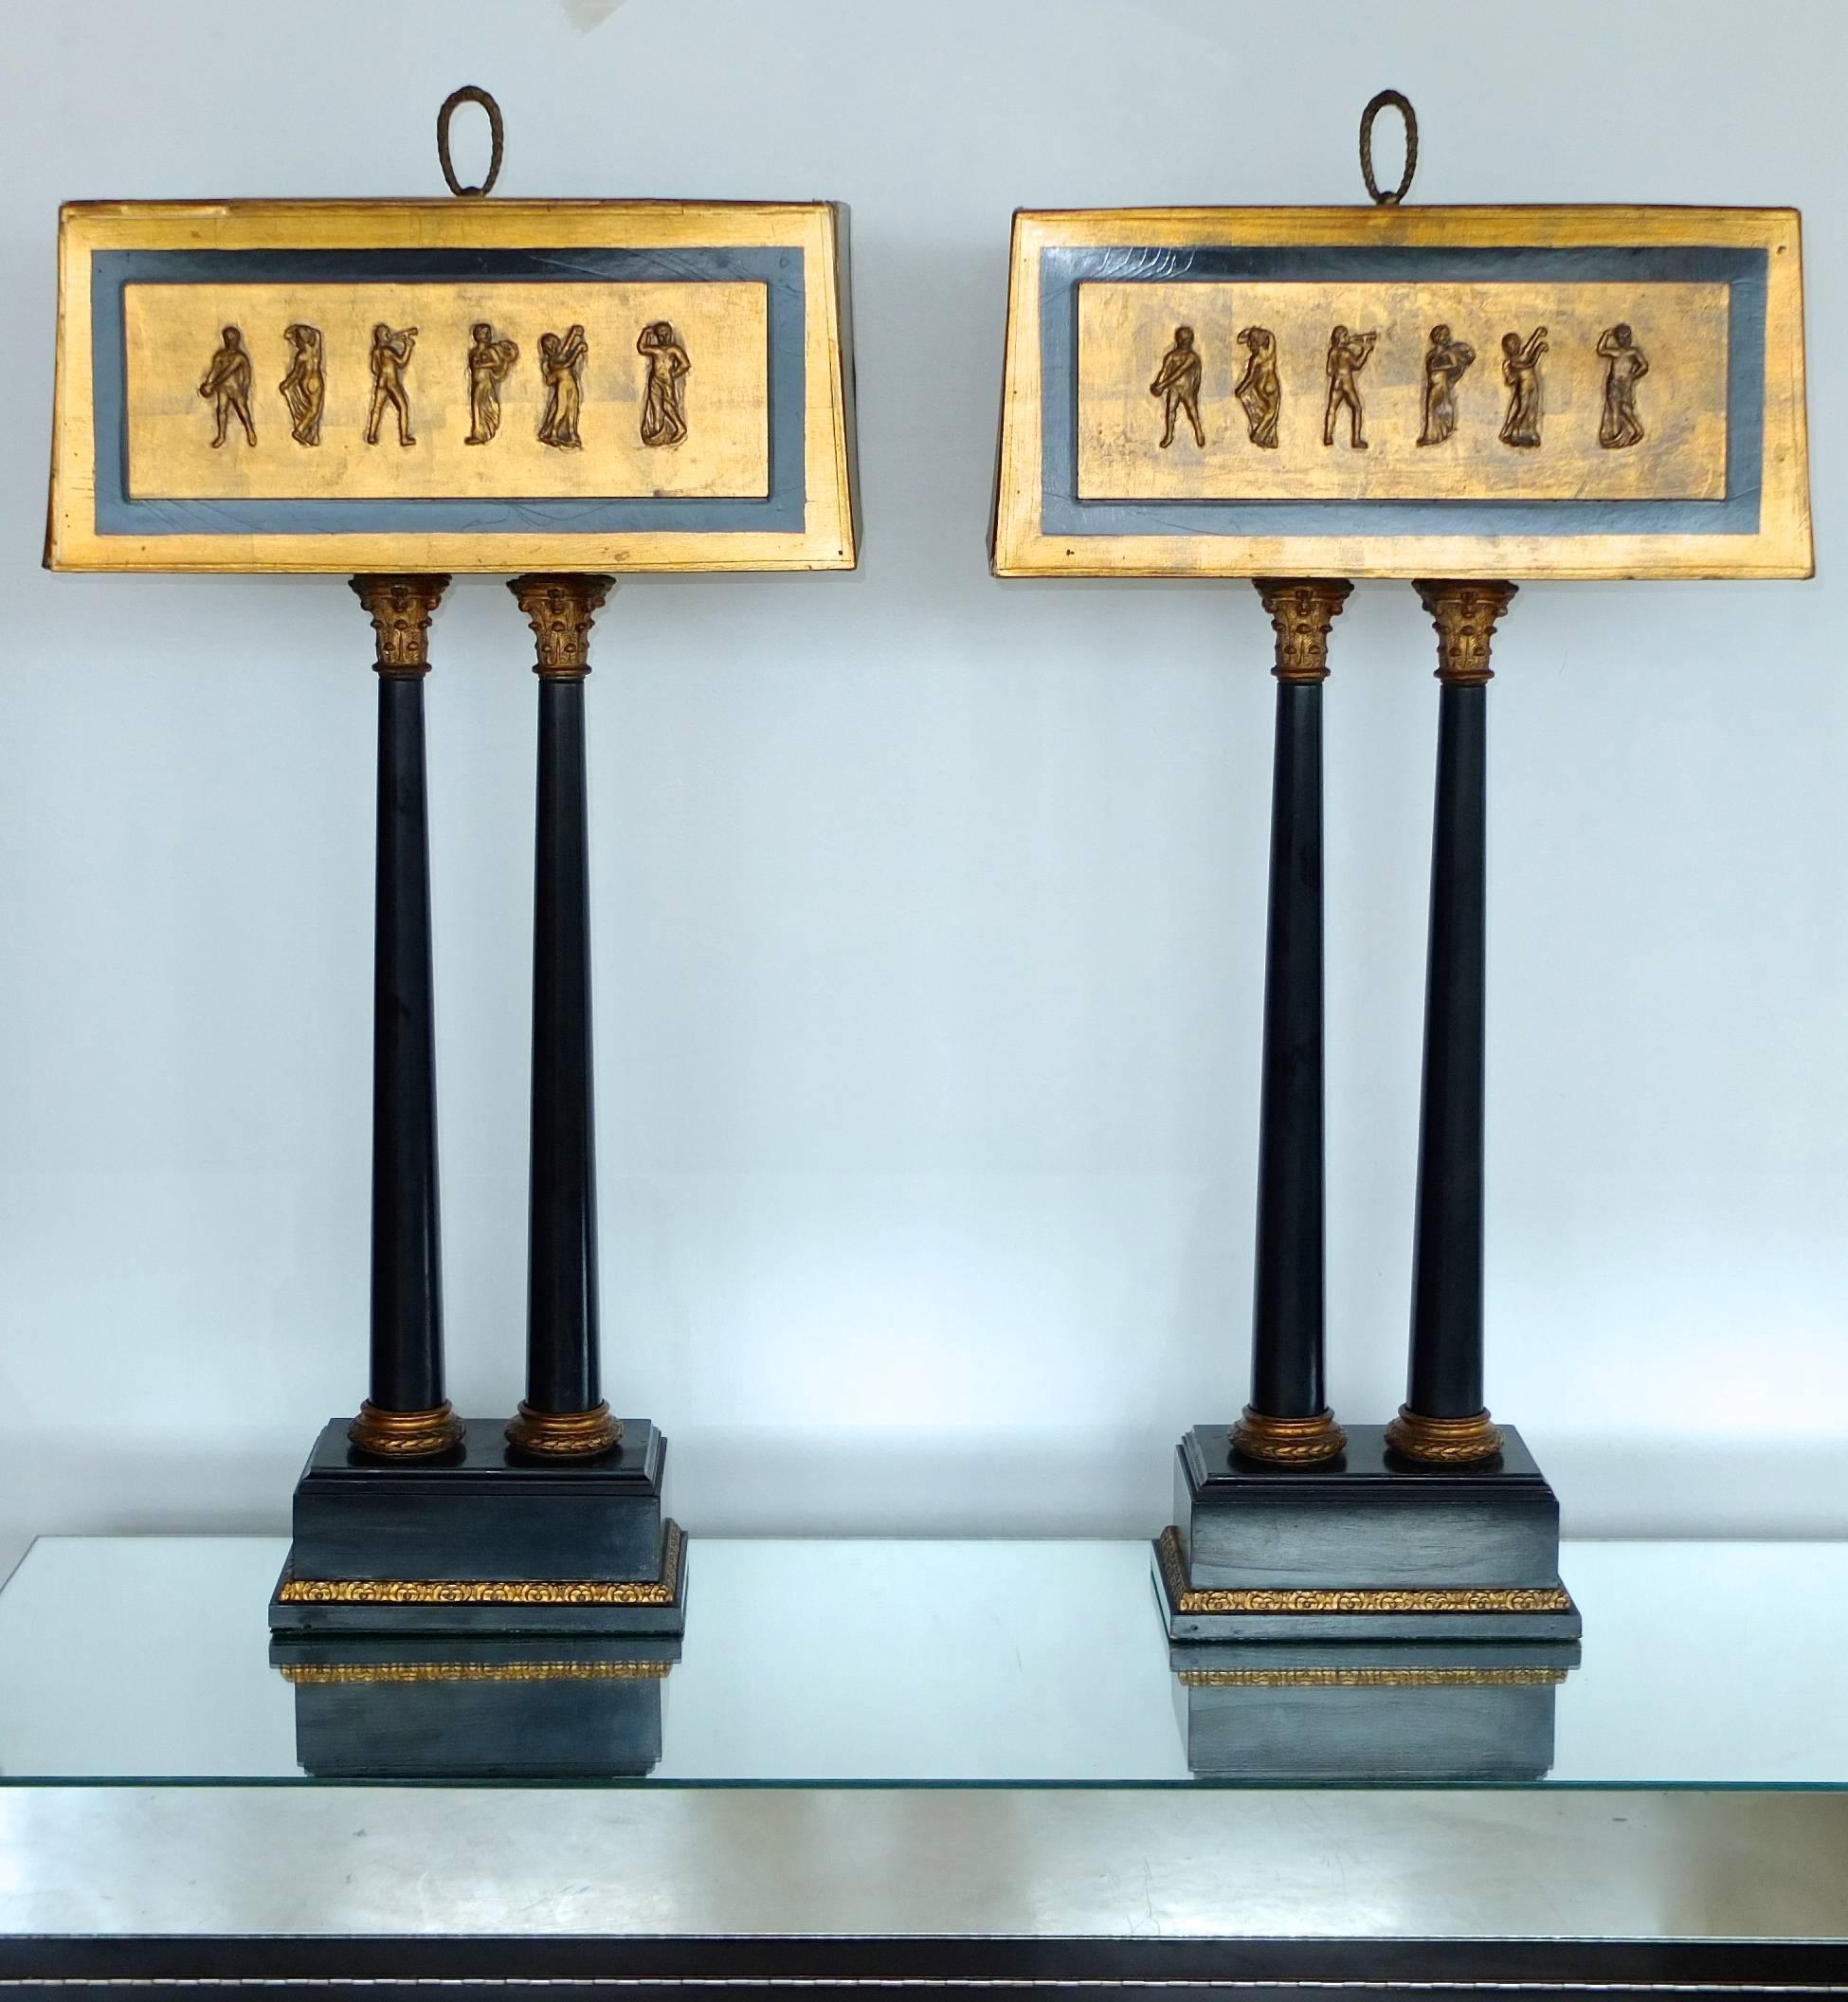 These lamps are very dramatic and quite camp, quasi Versace! 

Pair of vintage 1950s neoclassical style table lamps with ebonized double columns with gilt metal Corinthian capitals and bases mounted on a classical rectangular plinth, embellished